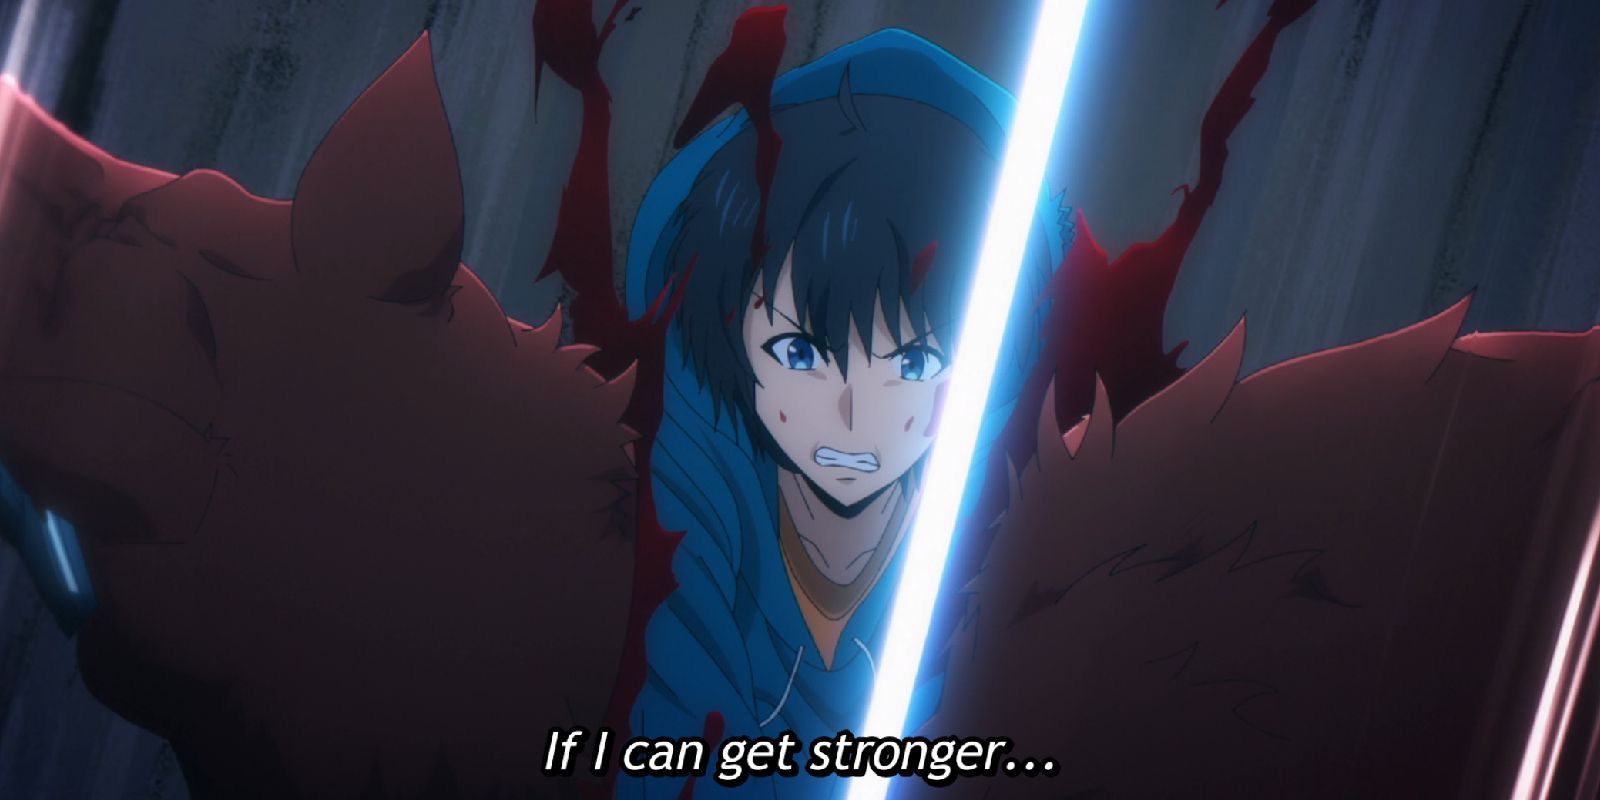 Sung Jinwoo cuts a Steel-fanged Lycan in half in the Solo Leveling anime